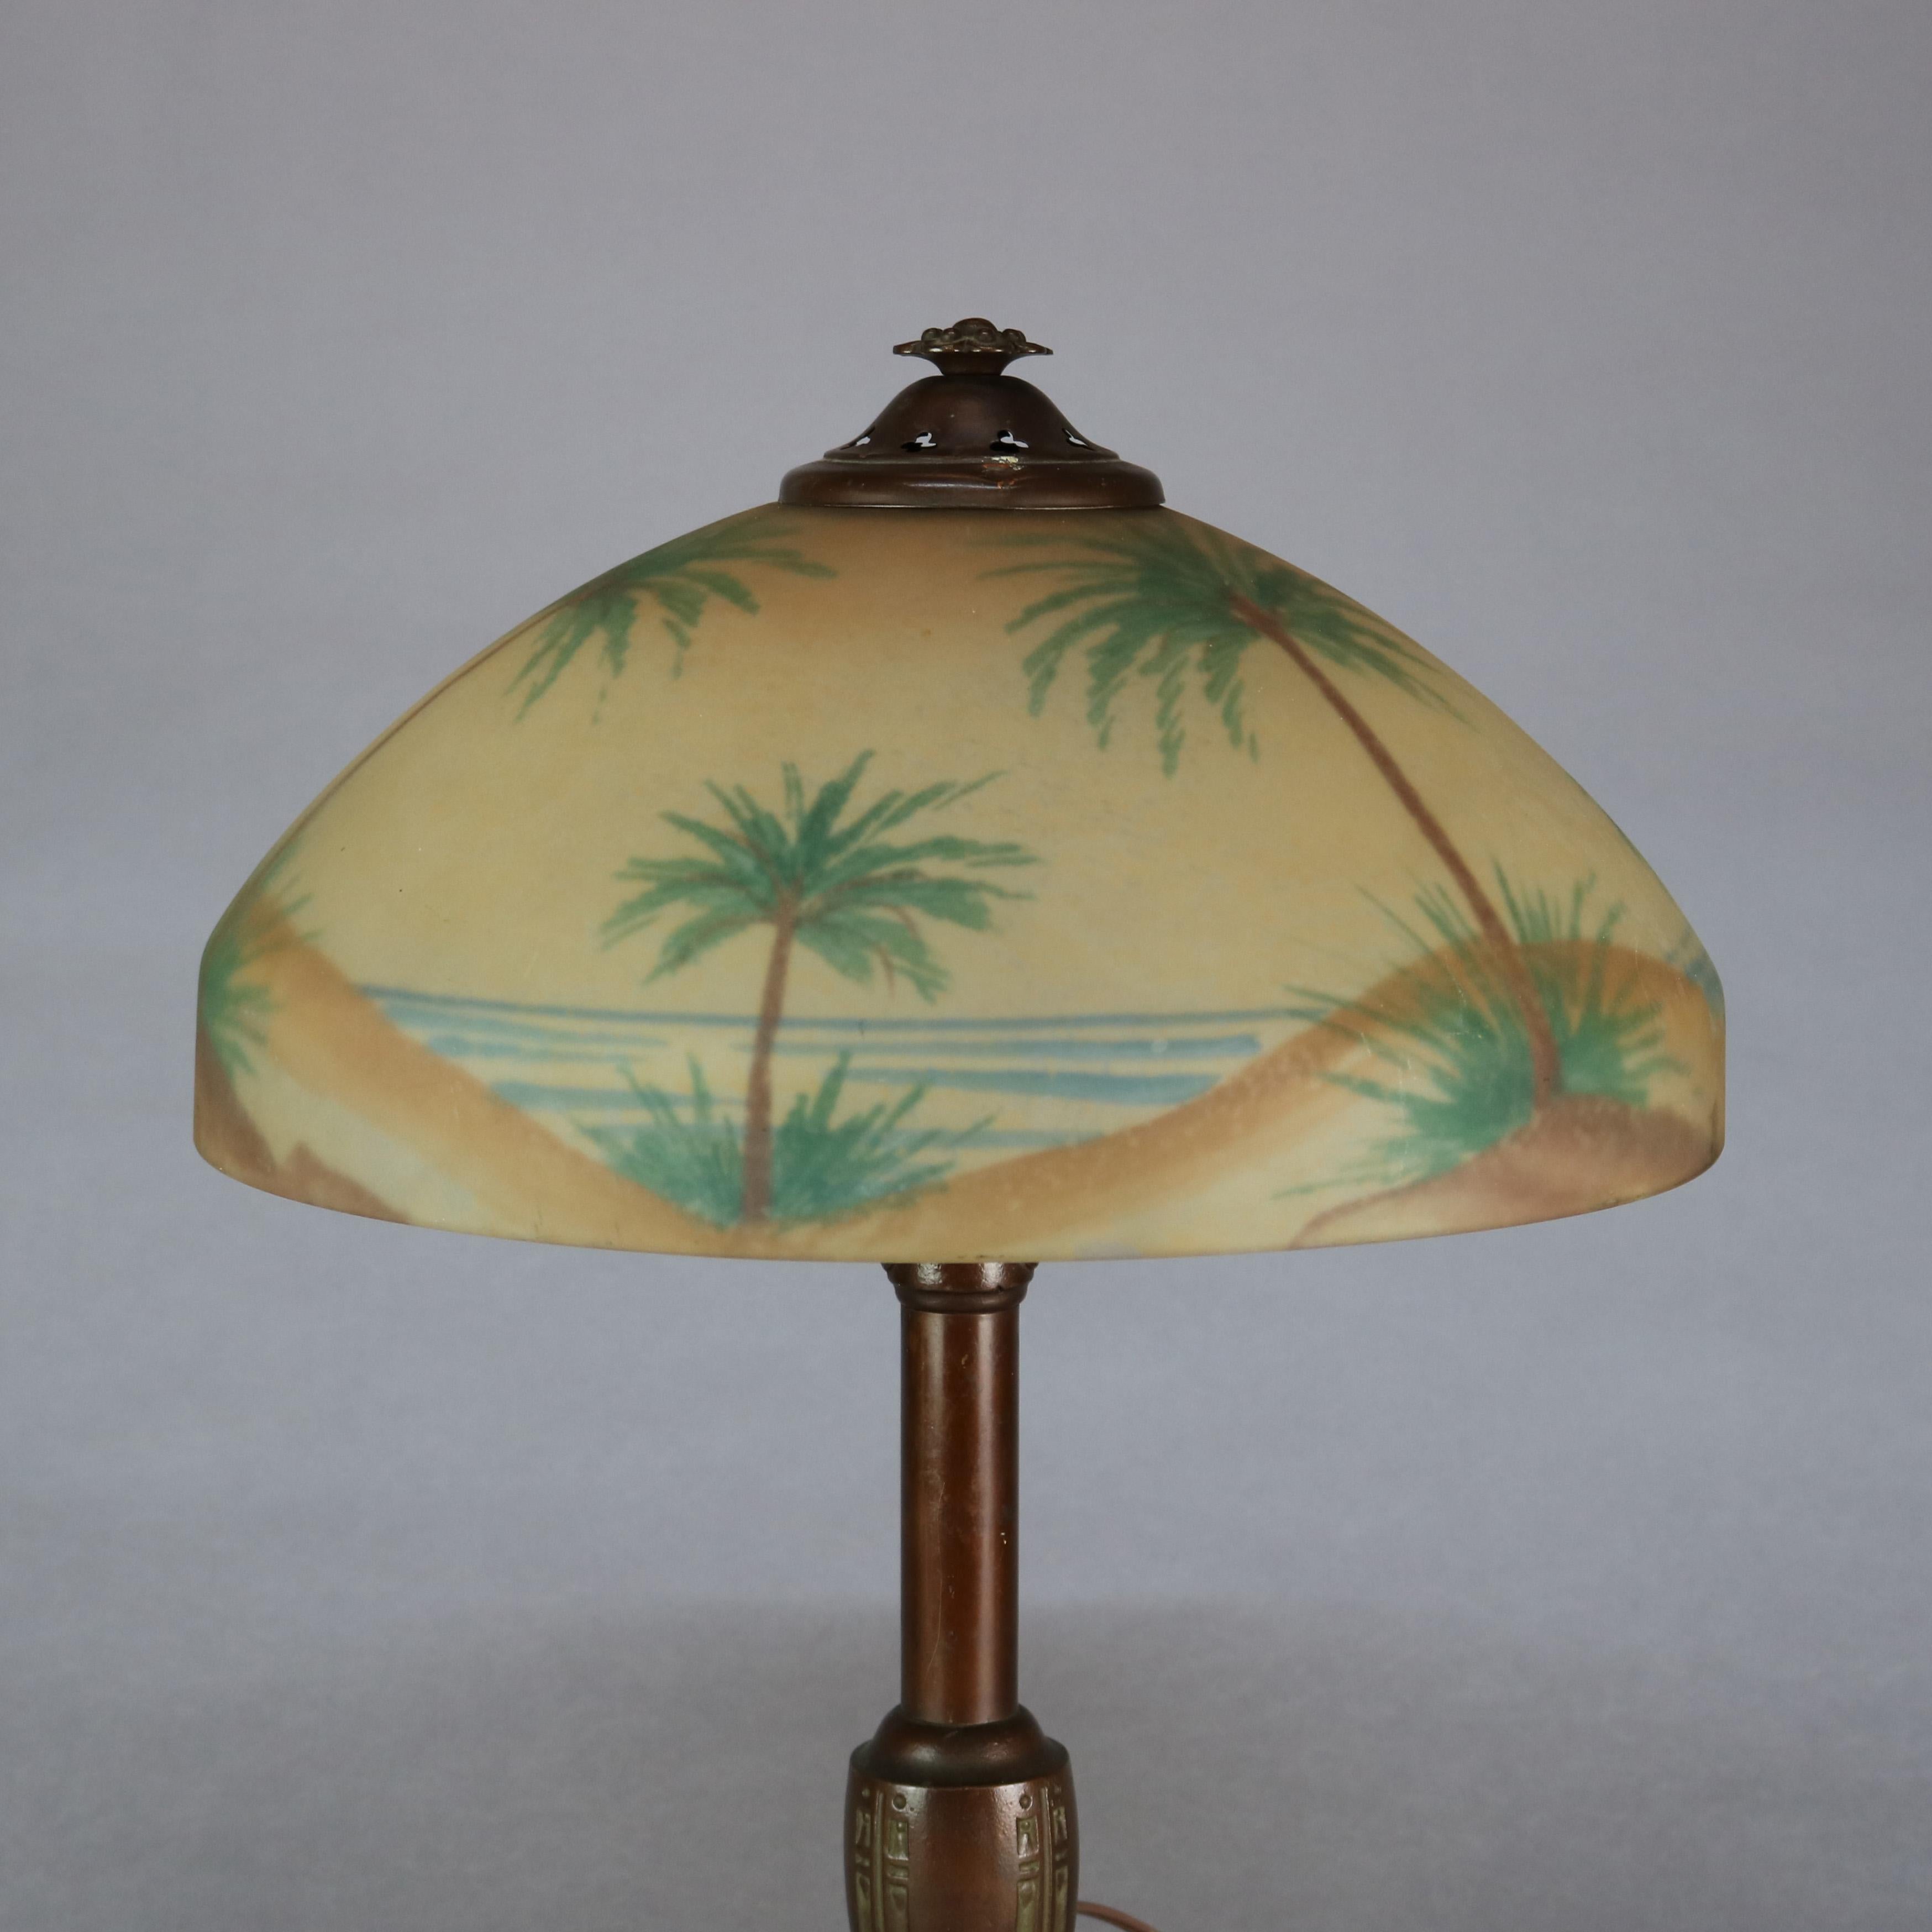 An antique table lamp in the manner of Pittsburgh Lamp Co. offers dual socket foliate cast base with foliate and scroll embossed base surmounted by shade having reverse hand painted glass dome with beach seashore scene with sunset, sand dunes,